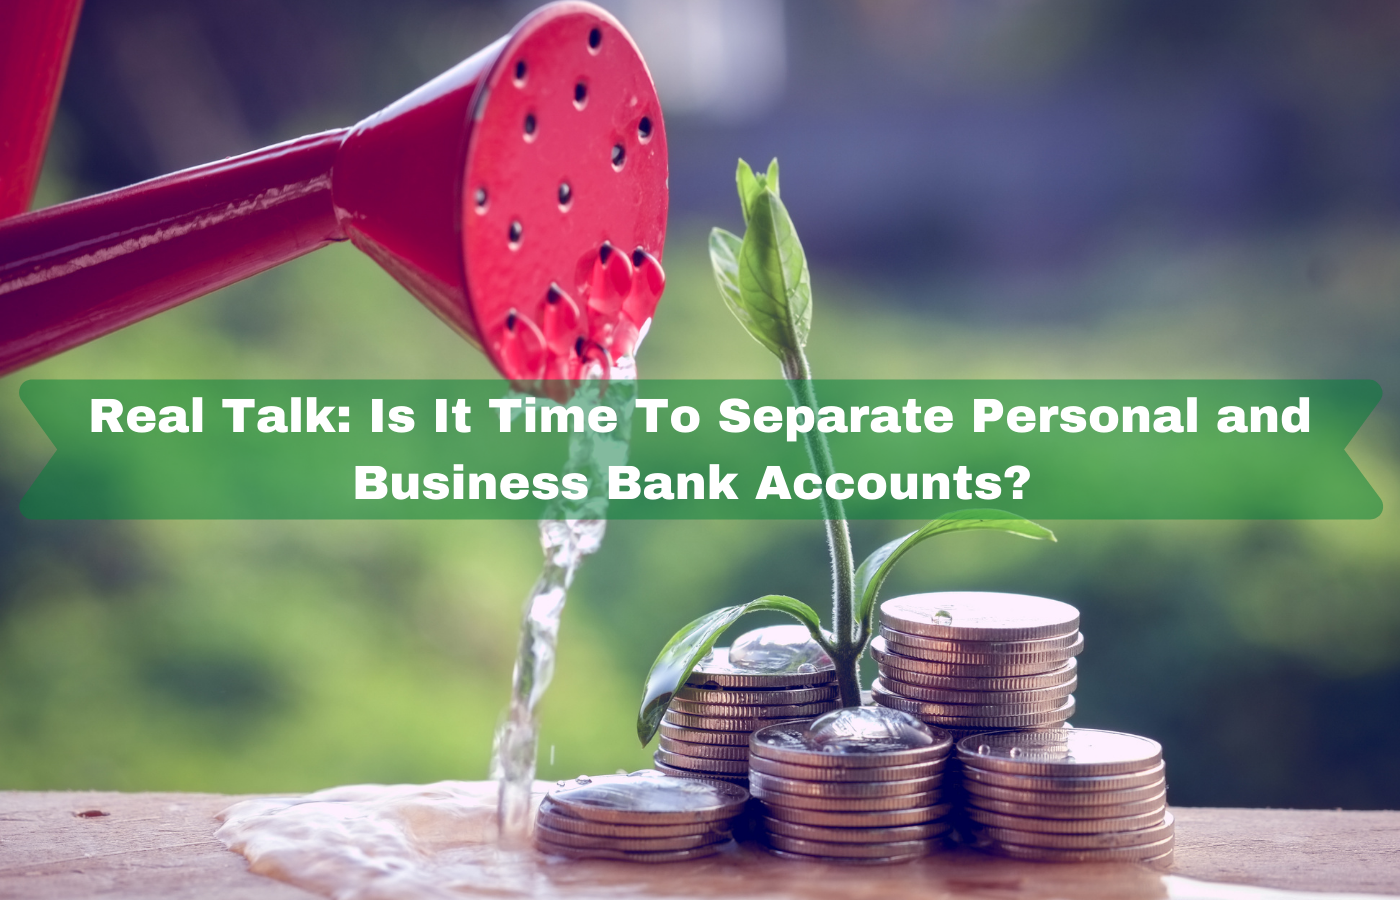 Real Talk: Is It Time To Separate Personal and Business Bank Accounts?